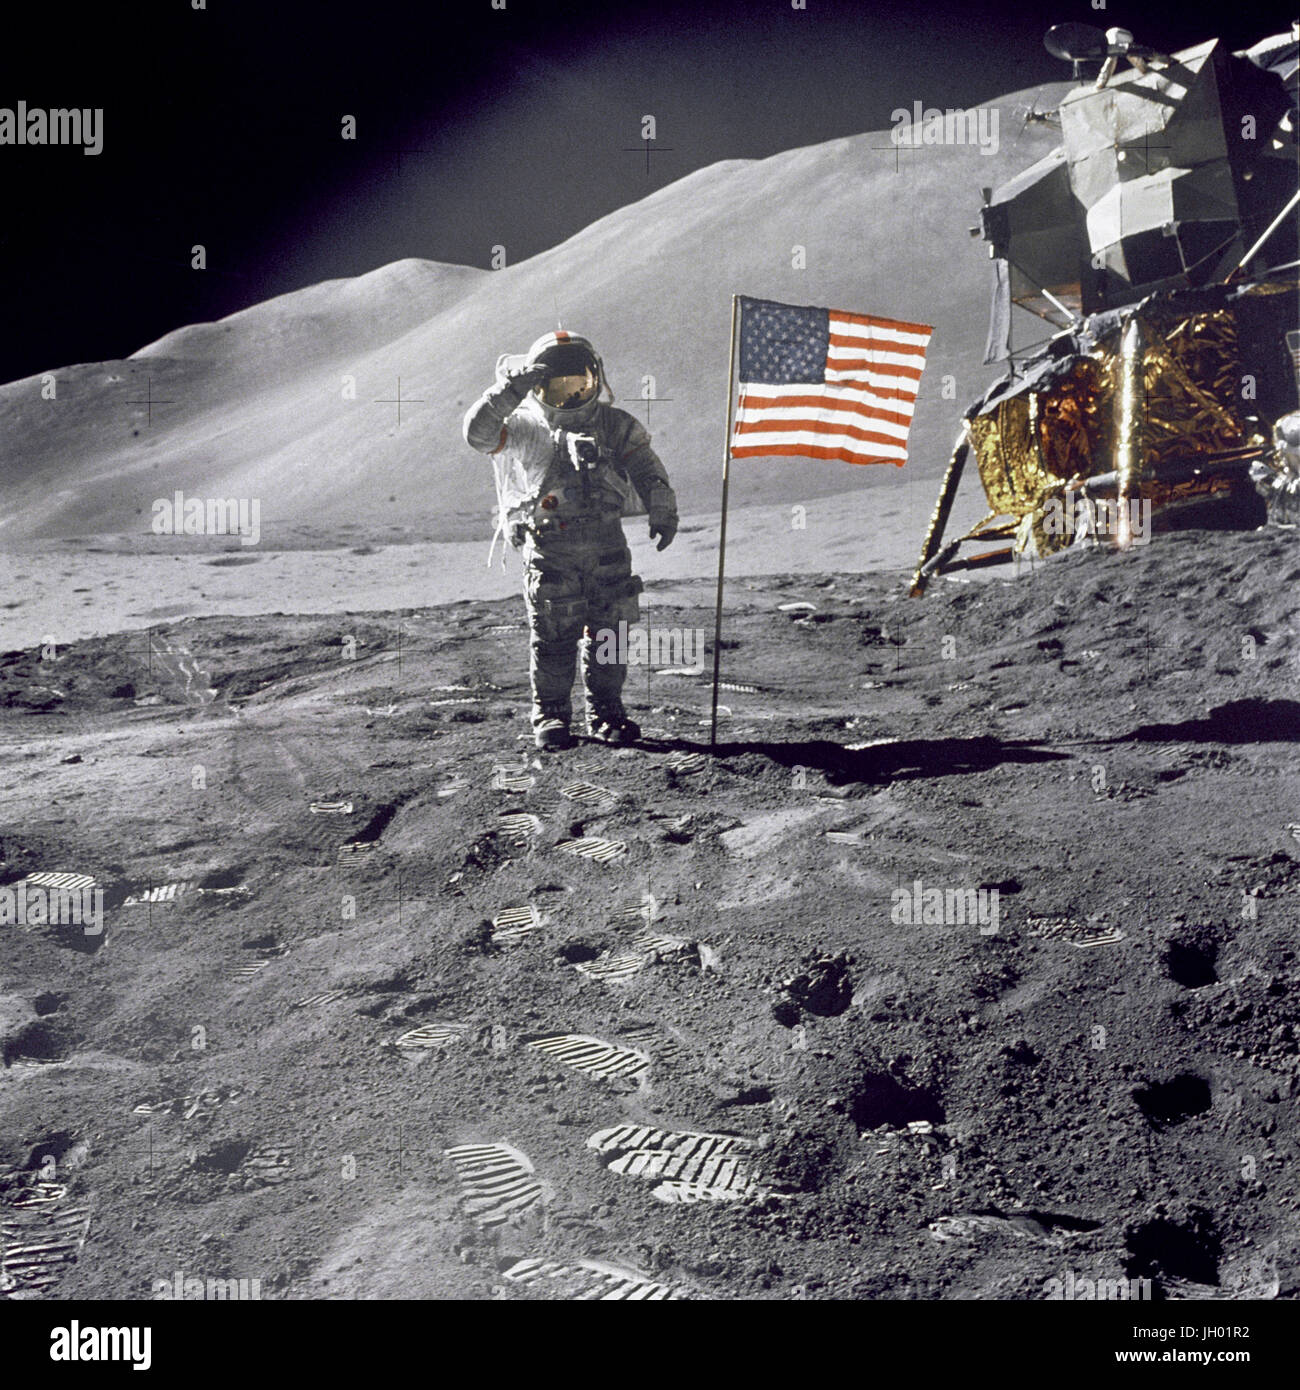 Scott Gives Salute. Astronaut David R. Scott, commander, gives a military salute while standing beside the deployed U.S. flag during the Apollo 15 lunar surface extravehicular activity (EVA) at the Hadley-Apennine landing site. The flag was deployed toward the end of EVA-2. The Lunar Module 'Falcon' is partially visible on the right. Hadley Delta in the background rises approximately 4,000 meters (about 13,124 feet) above the plain. The base of the mountain is approximately 5 kilometers (about 3 statute miles) away. This photograph was taken by Astronaut James B. Irwin, Lunar Module pilot. Pho Stock Photo